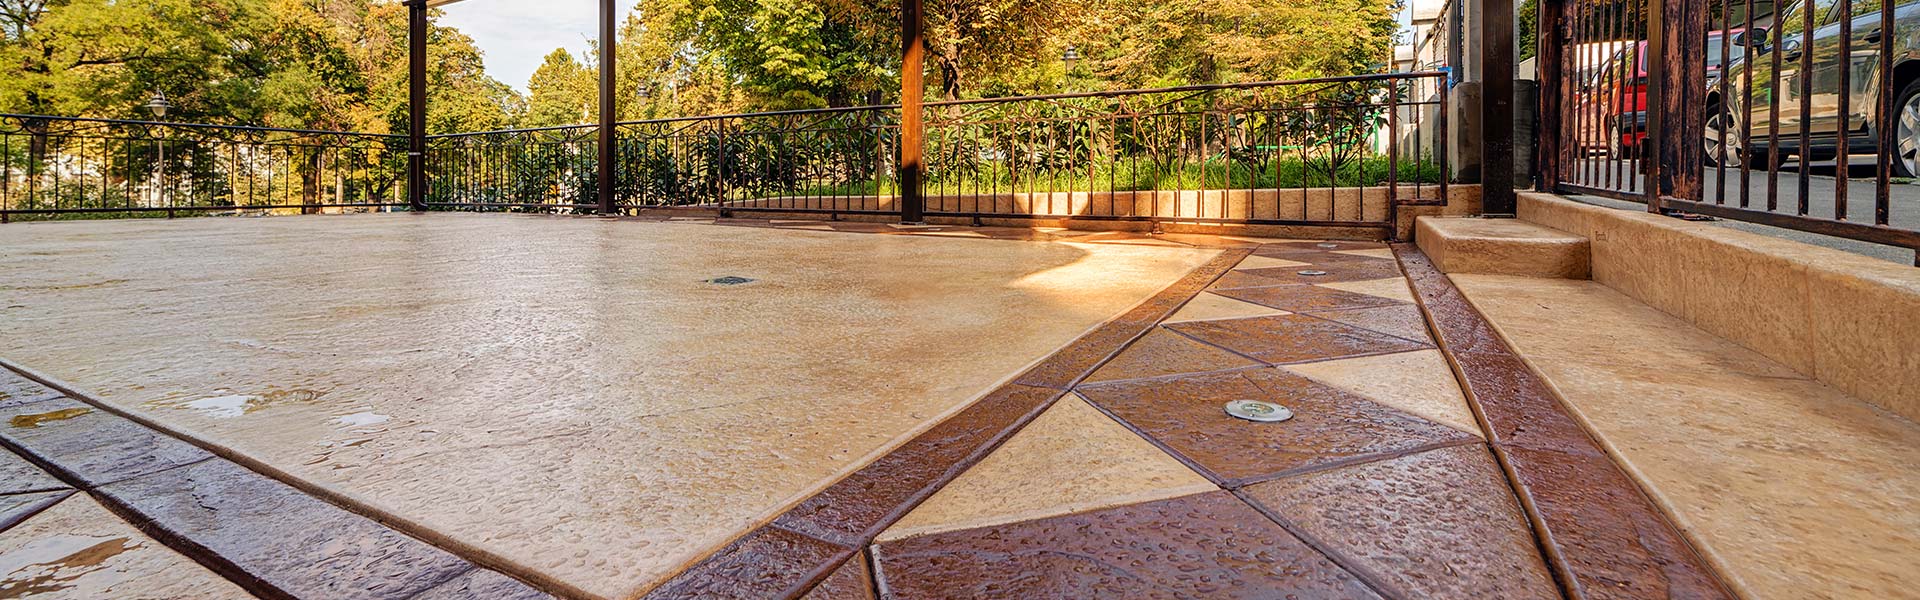 Are Decorative Concrete Coatings Right for your Project? - Rollinger ...